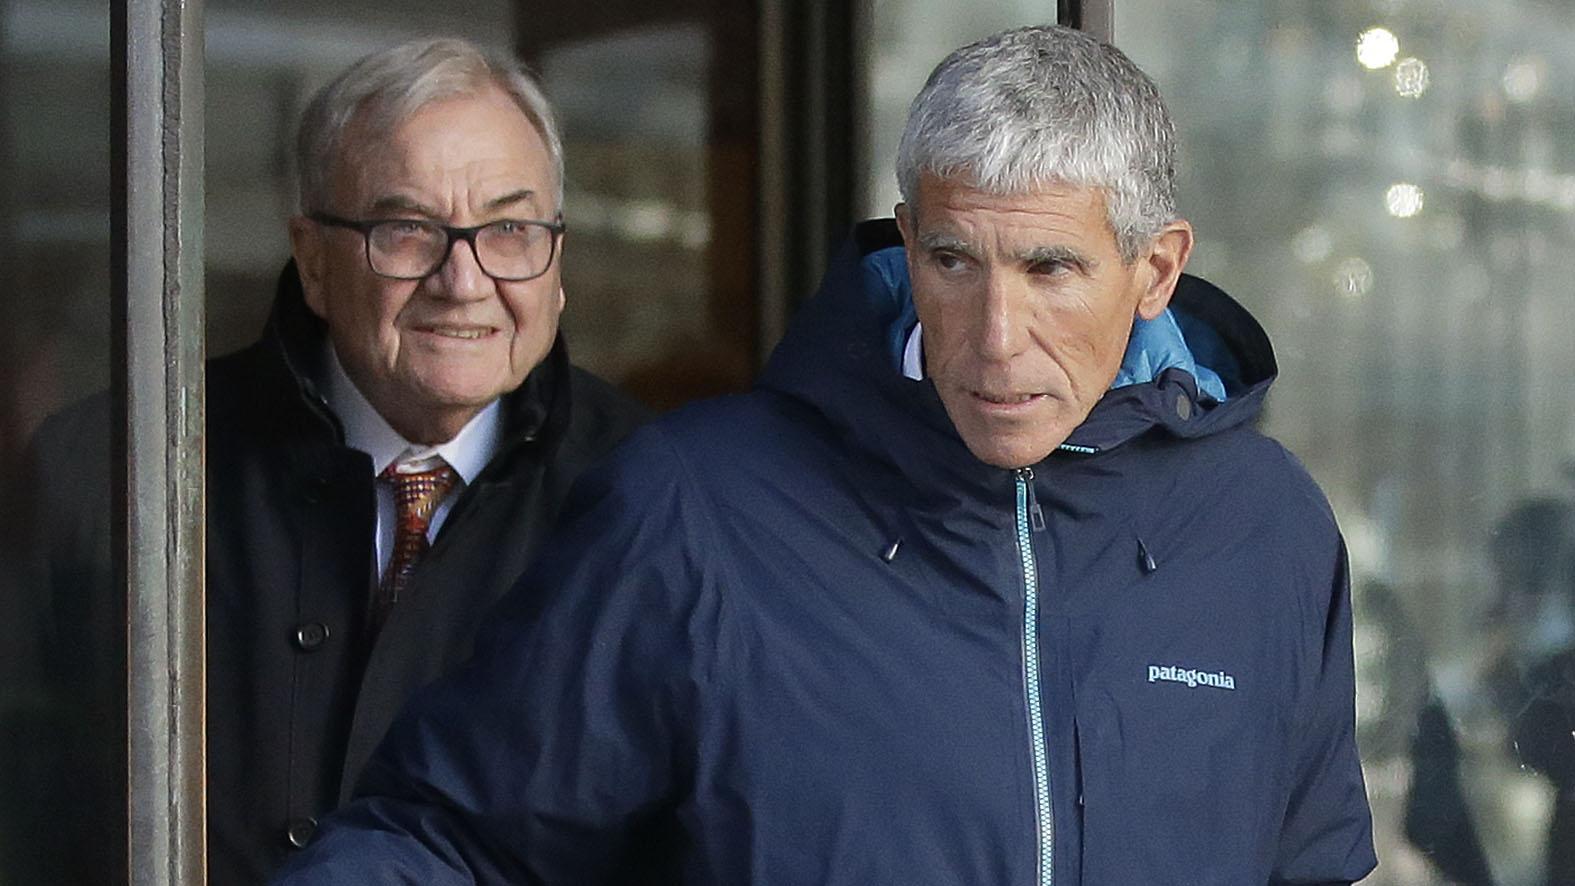 William “Rick” Singer, front, founder of the Edge College & Career Network, exits federal court in Boston on Tuesday, March 12, 2019, after he pleaded guilty to charges in a nationwide college admissions bribery scandal. (AP Photo / Steven Senne)